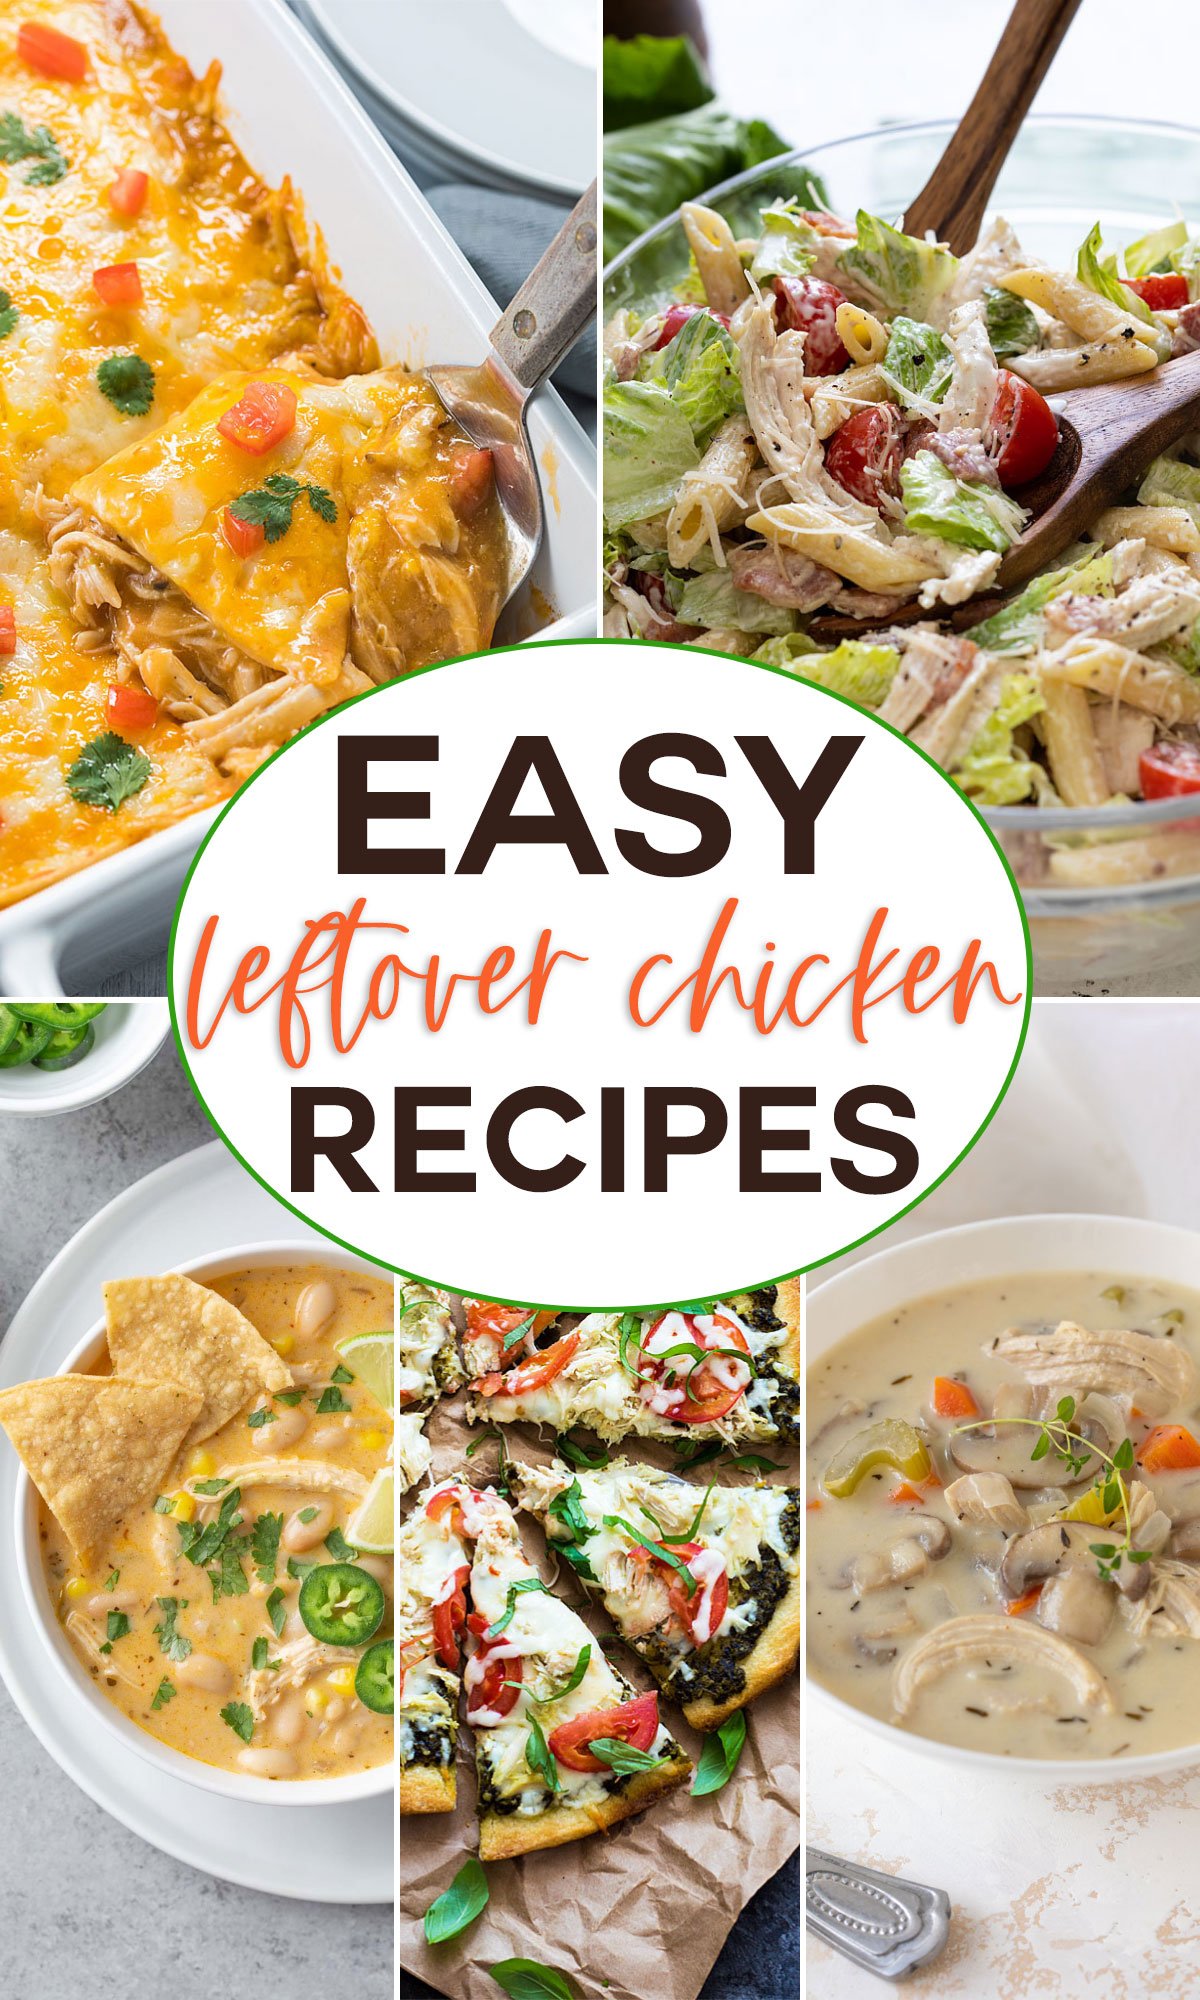 A collage of easy leftover chicken recipes with overlay text in the center.